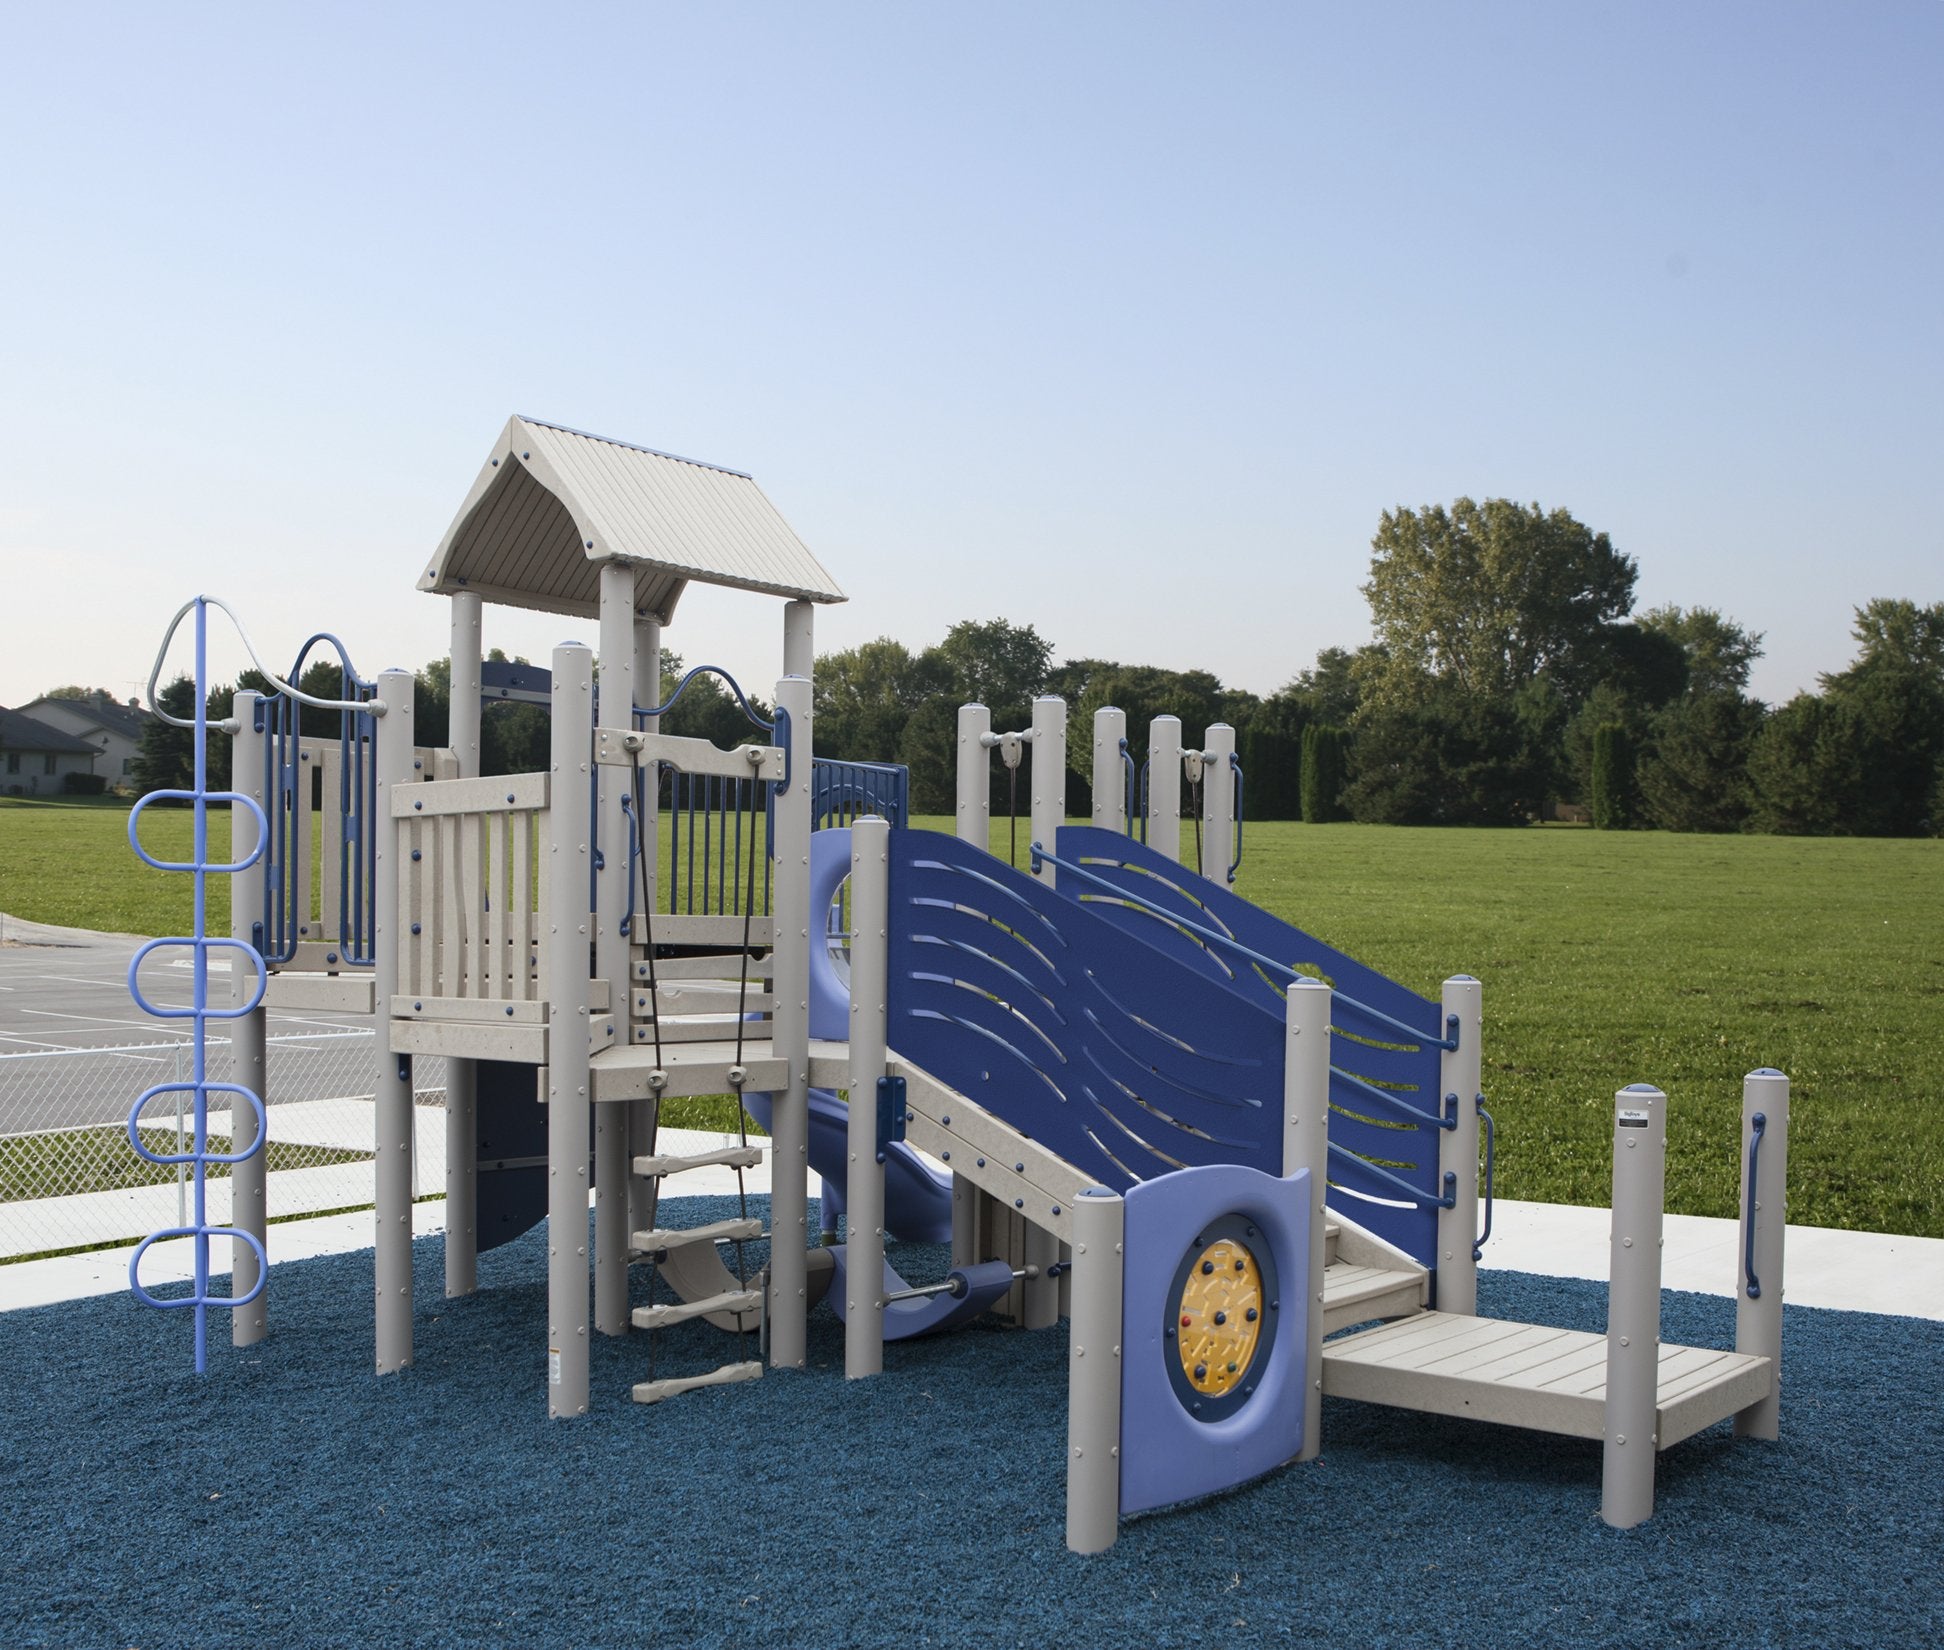 Hickory Play System | WillyGoat Playground & Park Equipment